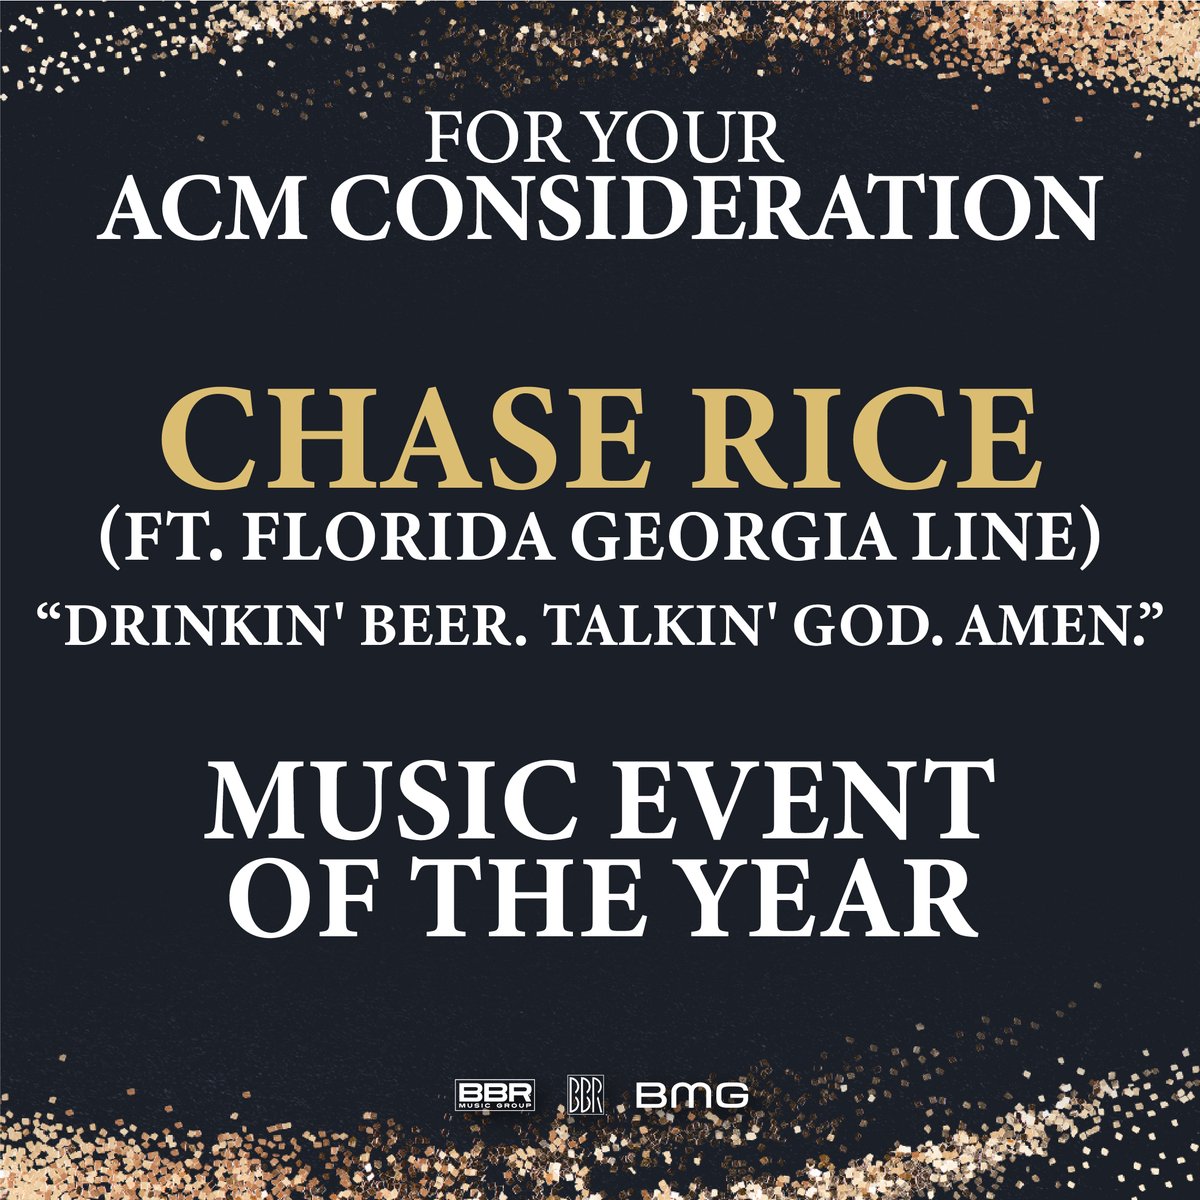 Honored to be nominated for this year’s “Music Event of the Year” @ACMawards with our good friend @ChaseRiceMusic for 'Drinkin' Beer. Talkin' God. Amen.'! 🙏🏼